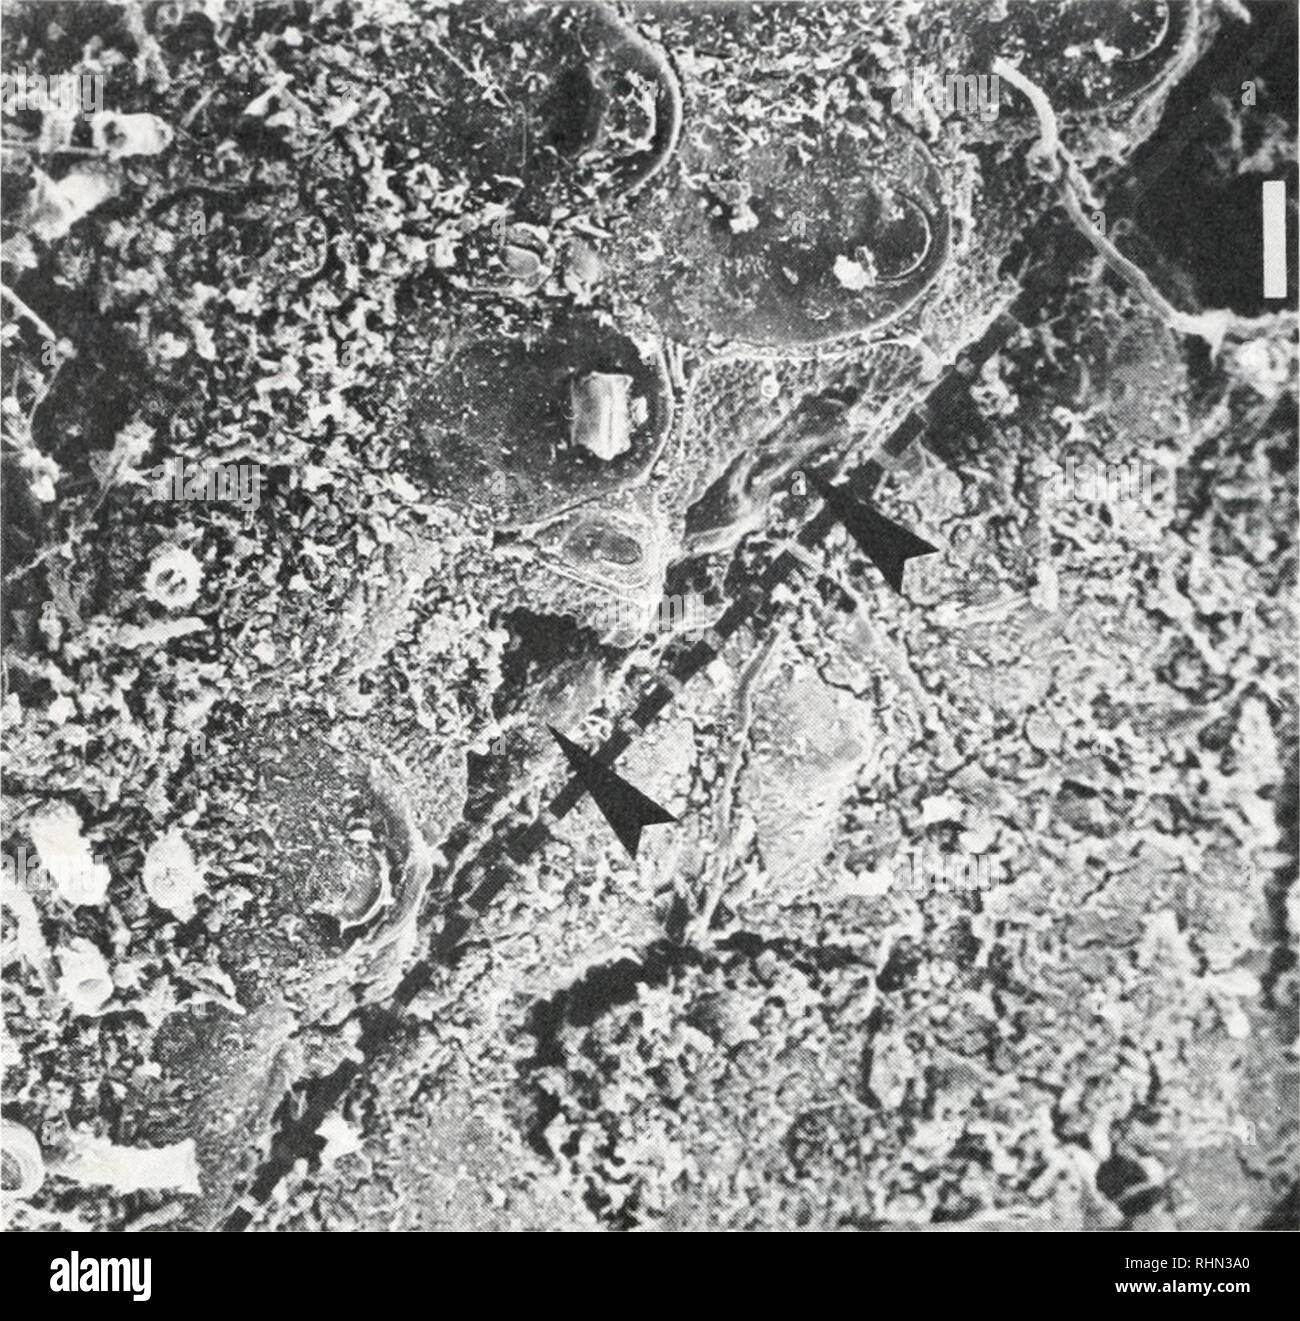 . The Biological bulletin. Biology; Zoology; Biology; Marine Biology. 100 M. LABARBERA. FIGURE 5. SEM micrograph of a bryozoan colony (Antropora tincta) adjacent to a D strigata. The brachiopod's valve margins are indicated by broken lines; note that several zooids adjacent to the brachiopod have been bisected (arrows) and that the colony has been eroded down to its basis beneath the brachiopod. Scale bar = 100 ^m. and mechanically inhibits sponge and bryozoan growth by directly damaging their tissues. The growing edge of sponges is initially thin (Ayling, 1983) and lacks spicular or fibrous r Stock Photo